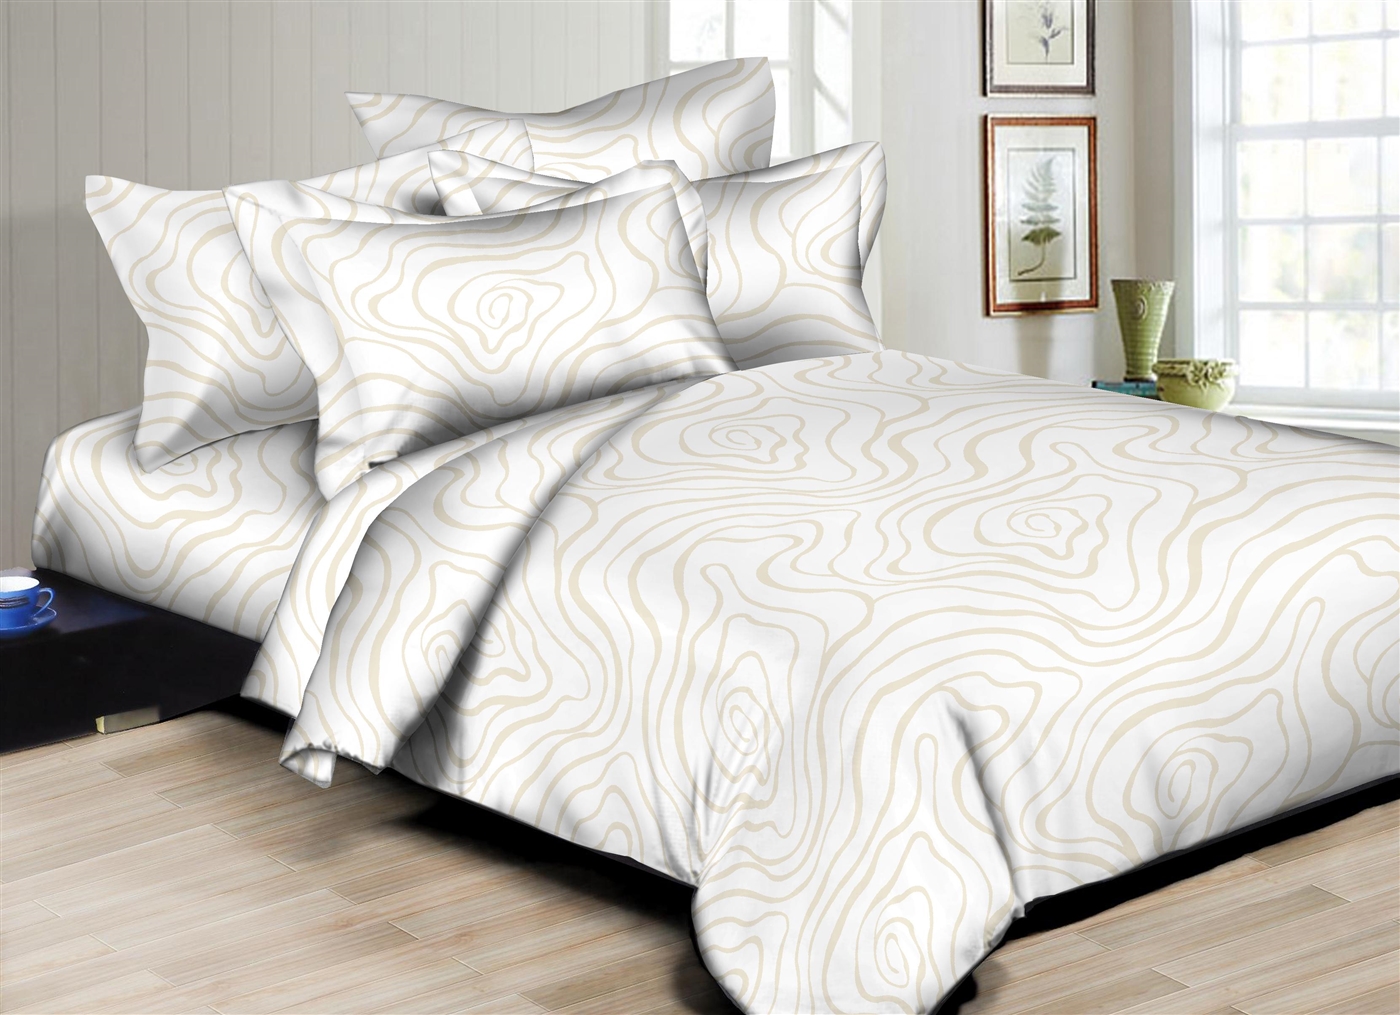 Better Bed Collection: New Dimension Ivory 8PC Bedding Sets - 300 Thread Count